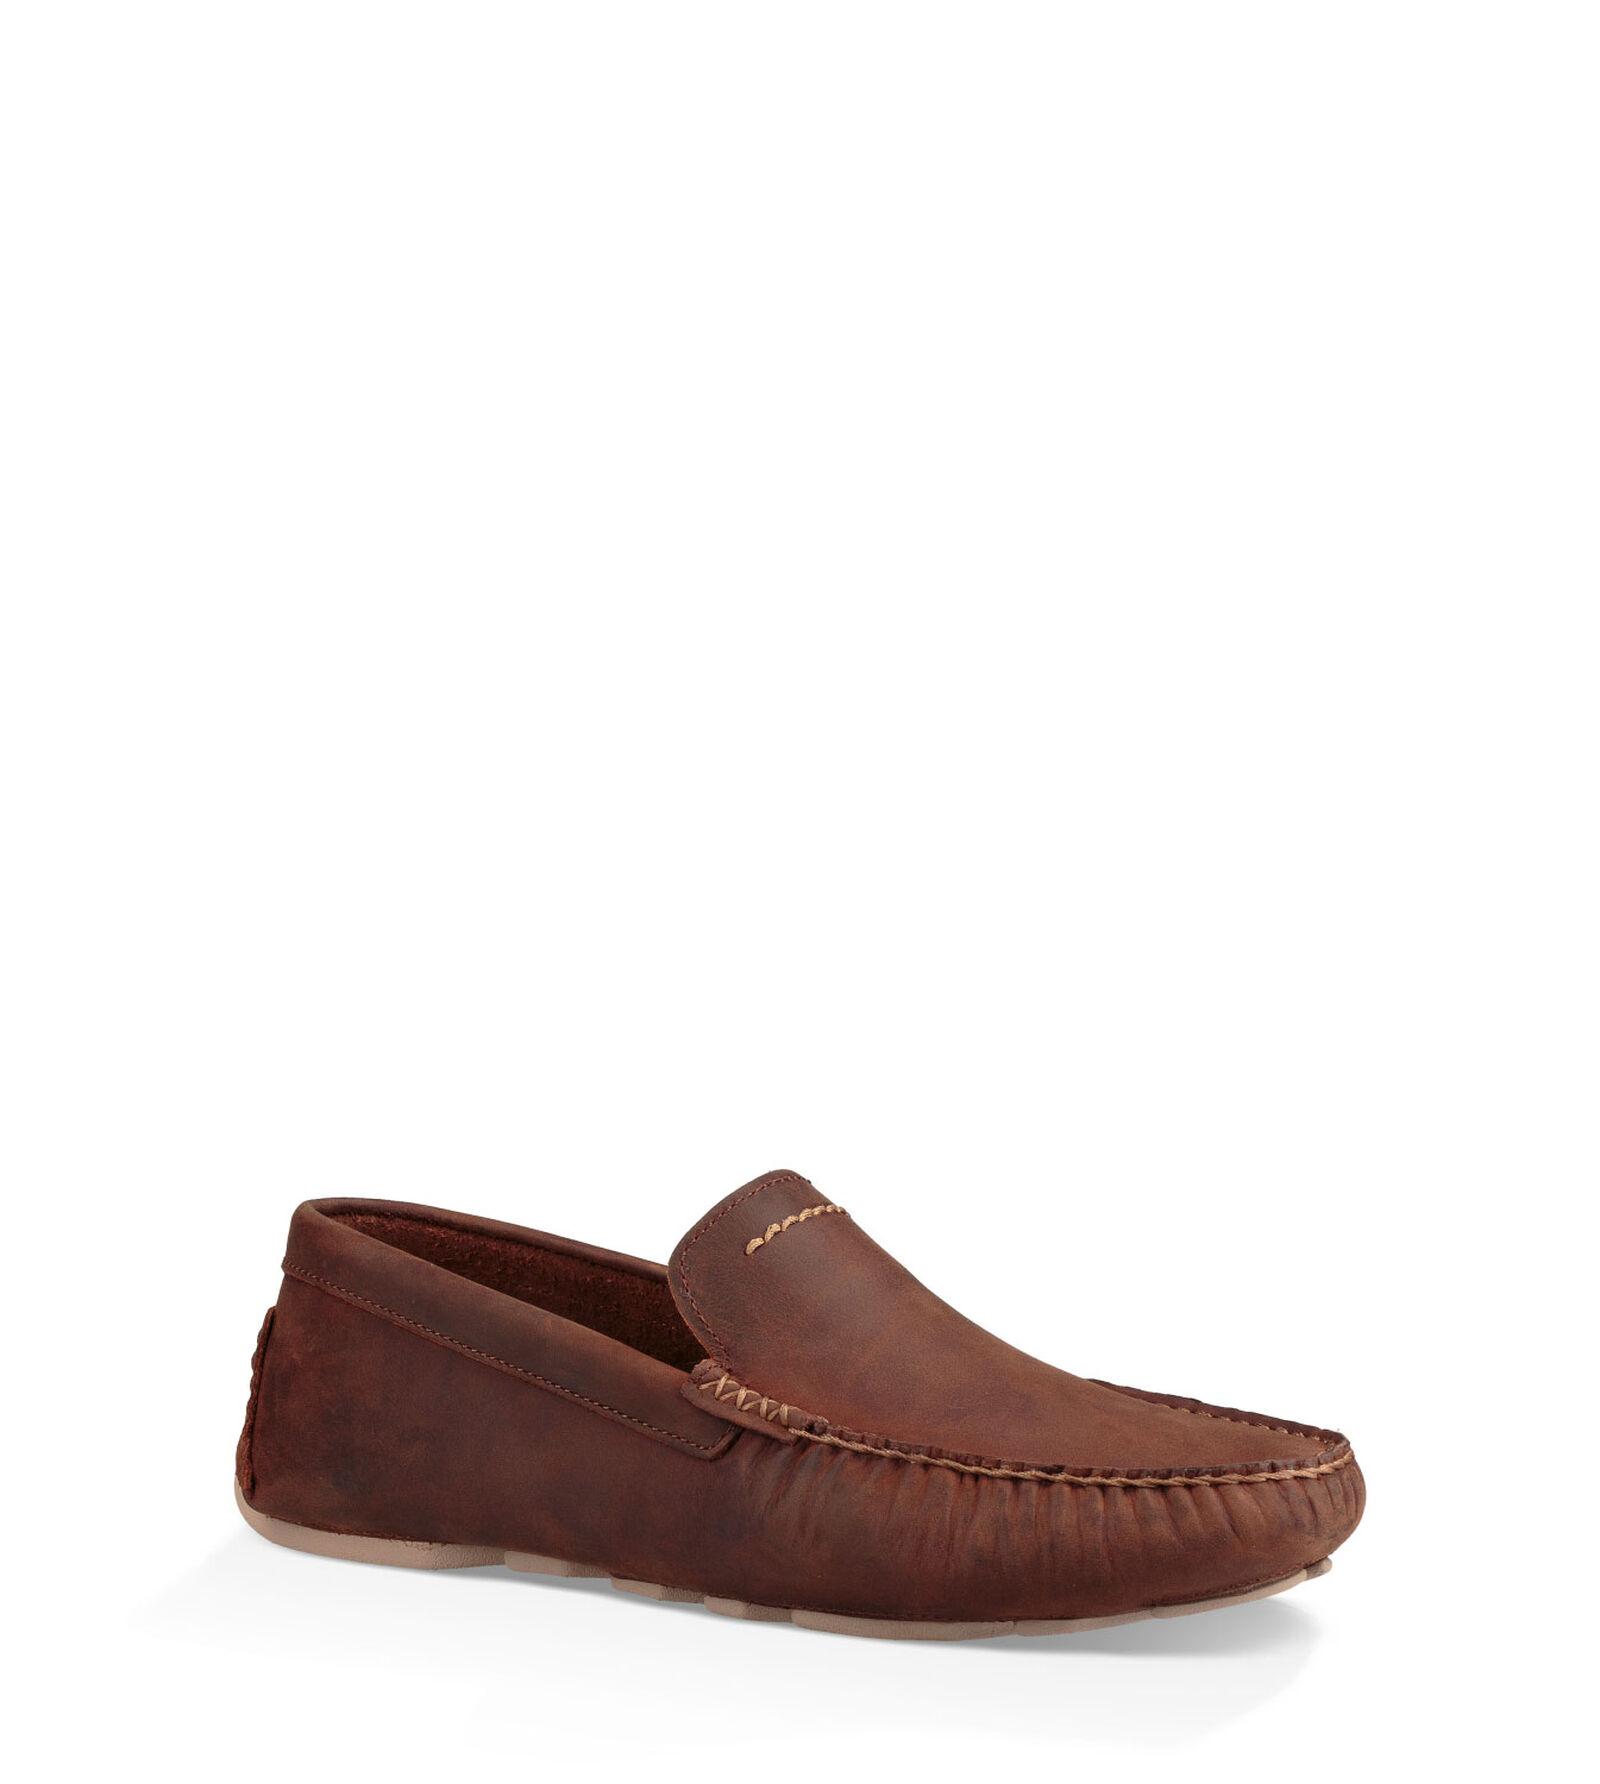 UGG Leather Henrick Loafer Suede in Red Clay (Brown) for Men - Lyst